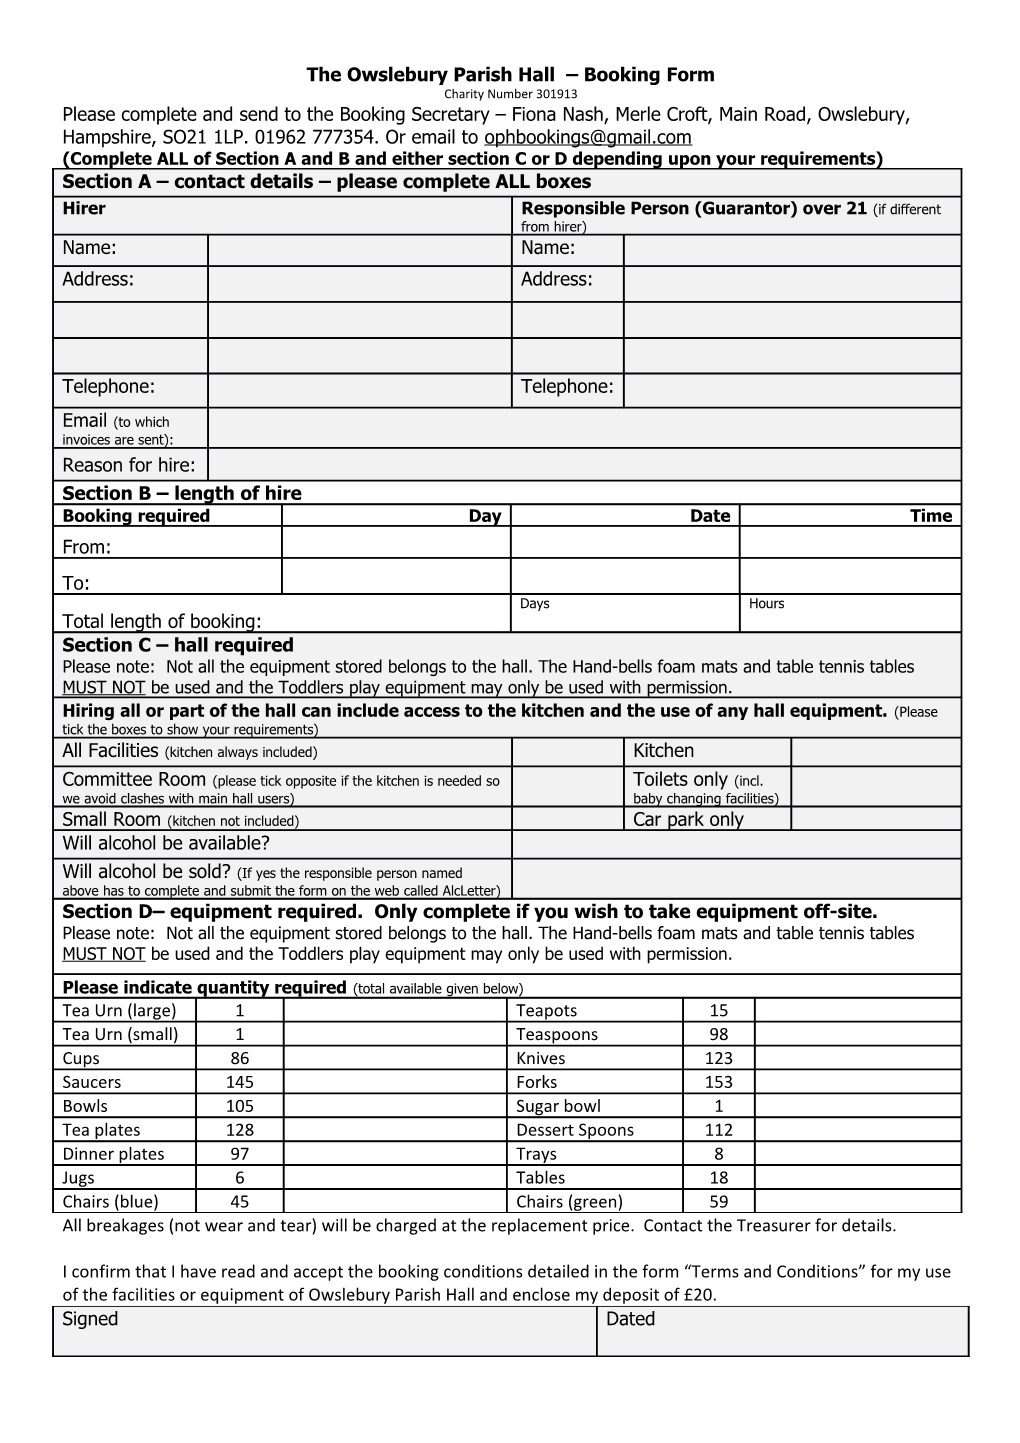 The Owslebury Parish Hall Booking Form